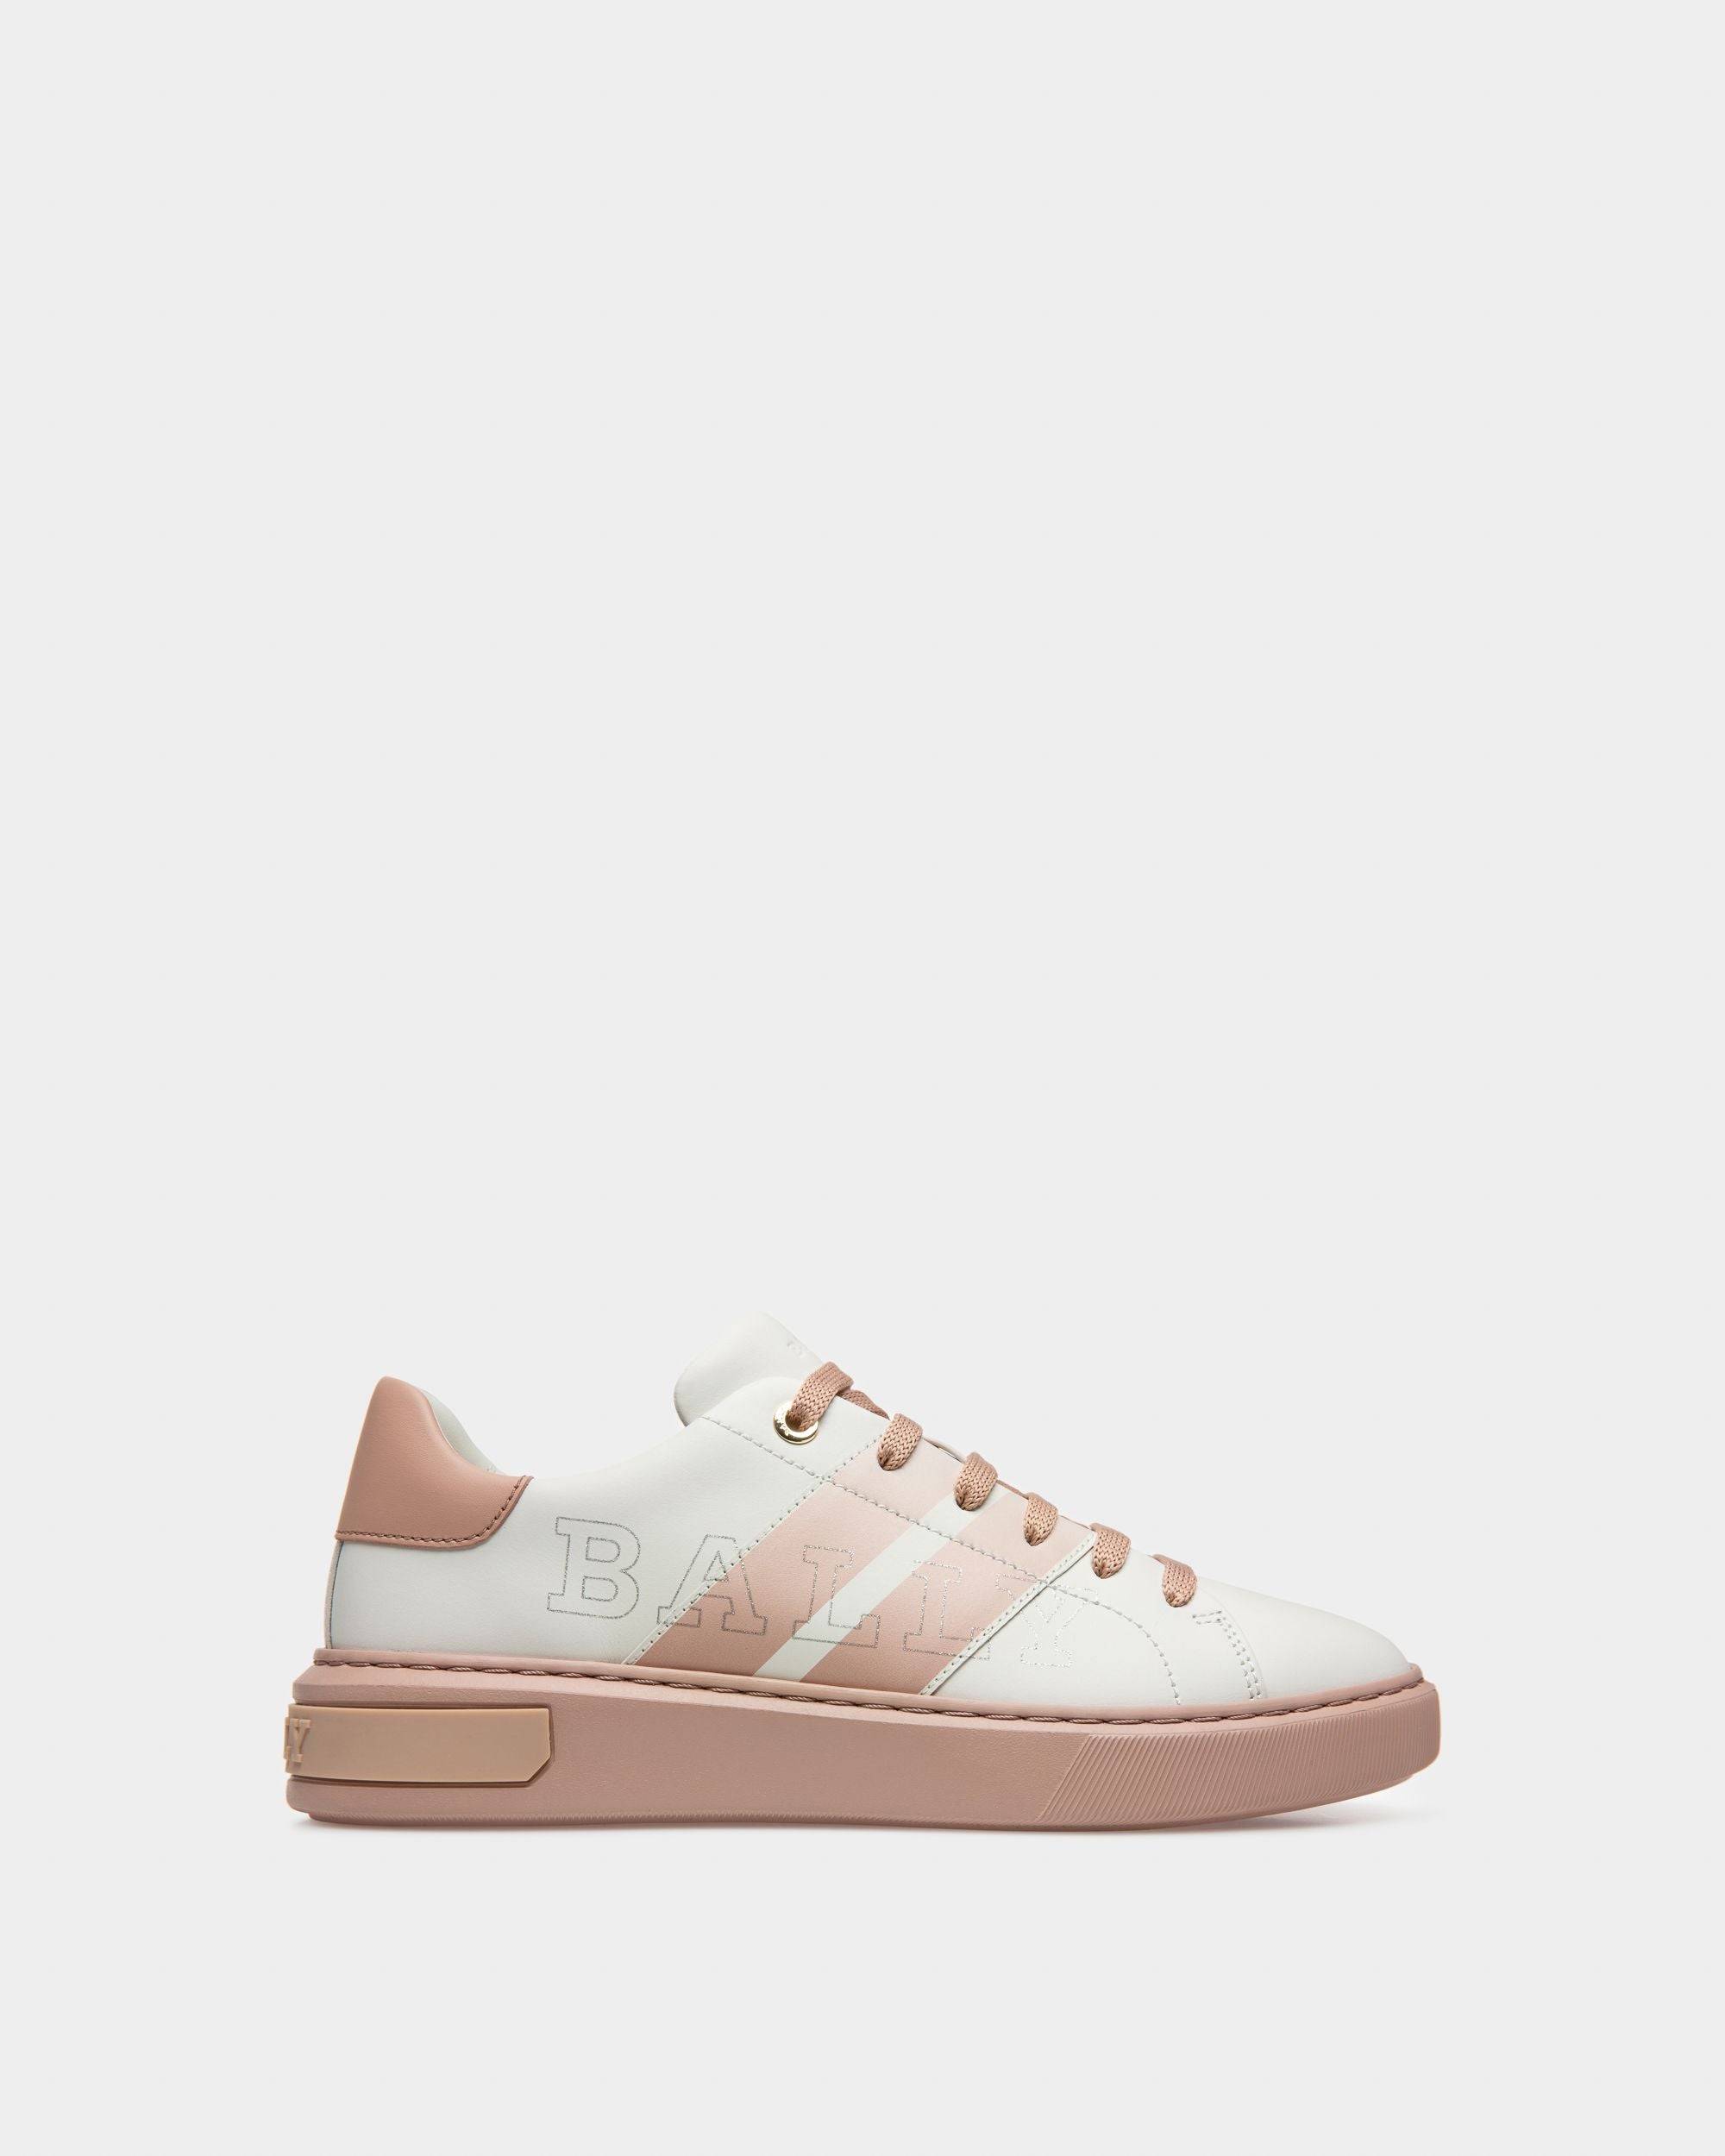 Myra Leather Sneakers In White & Pink - Women's - Bally